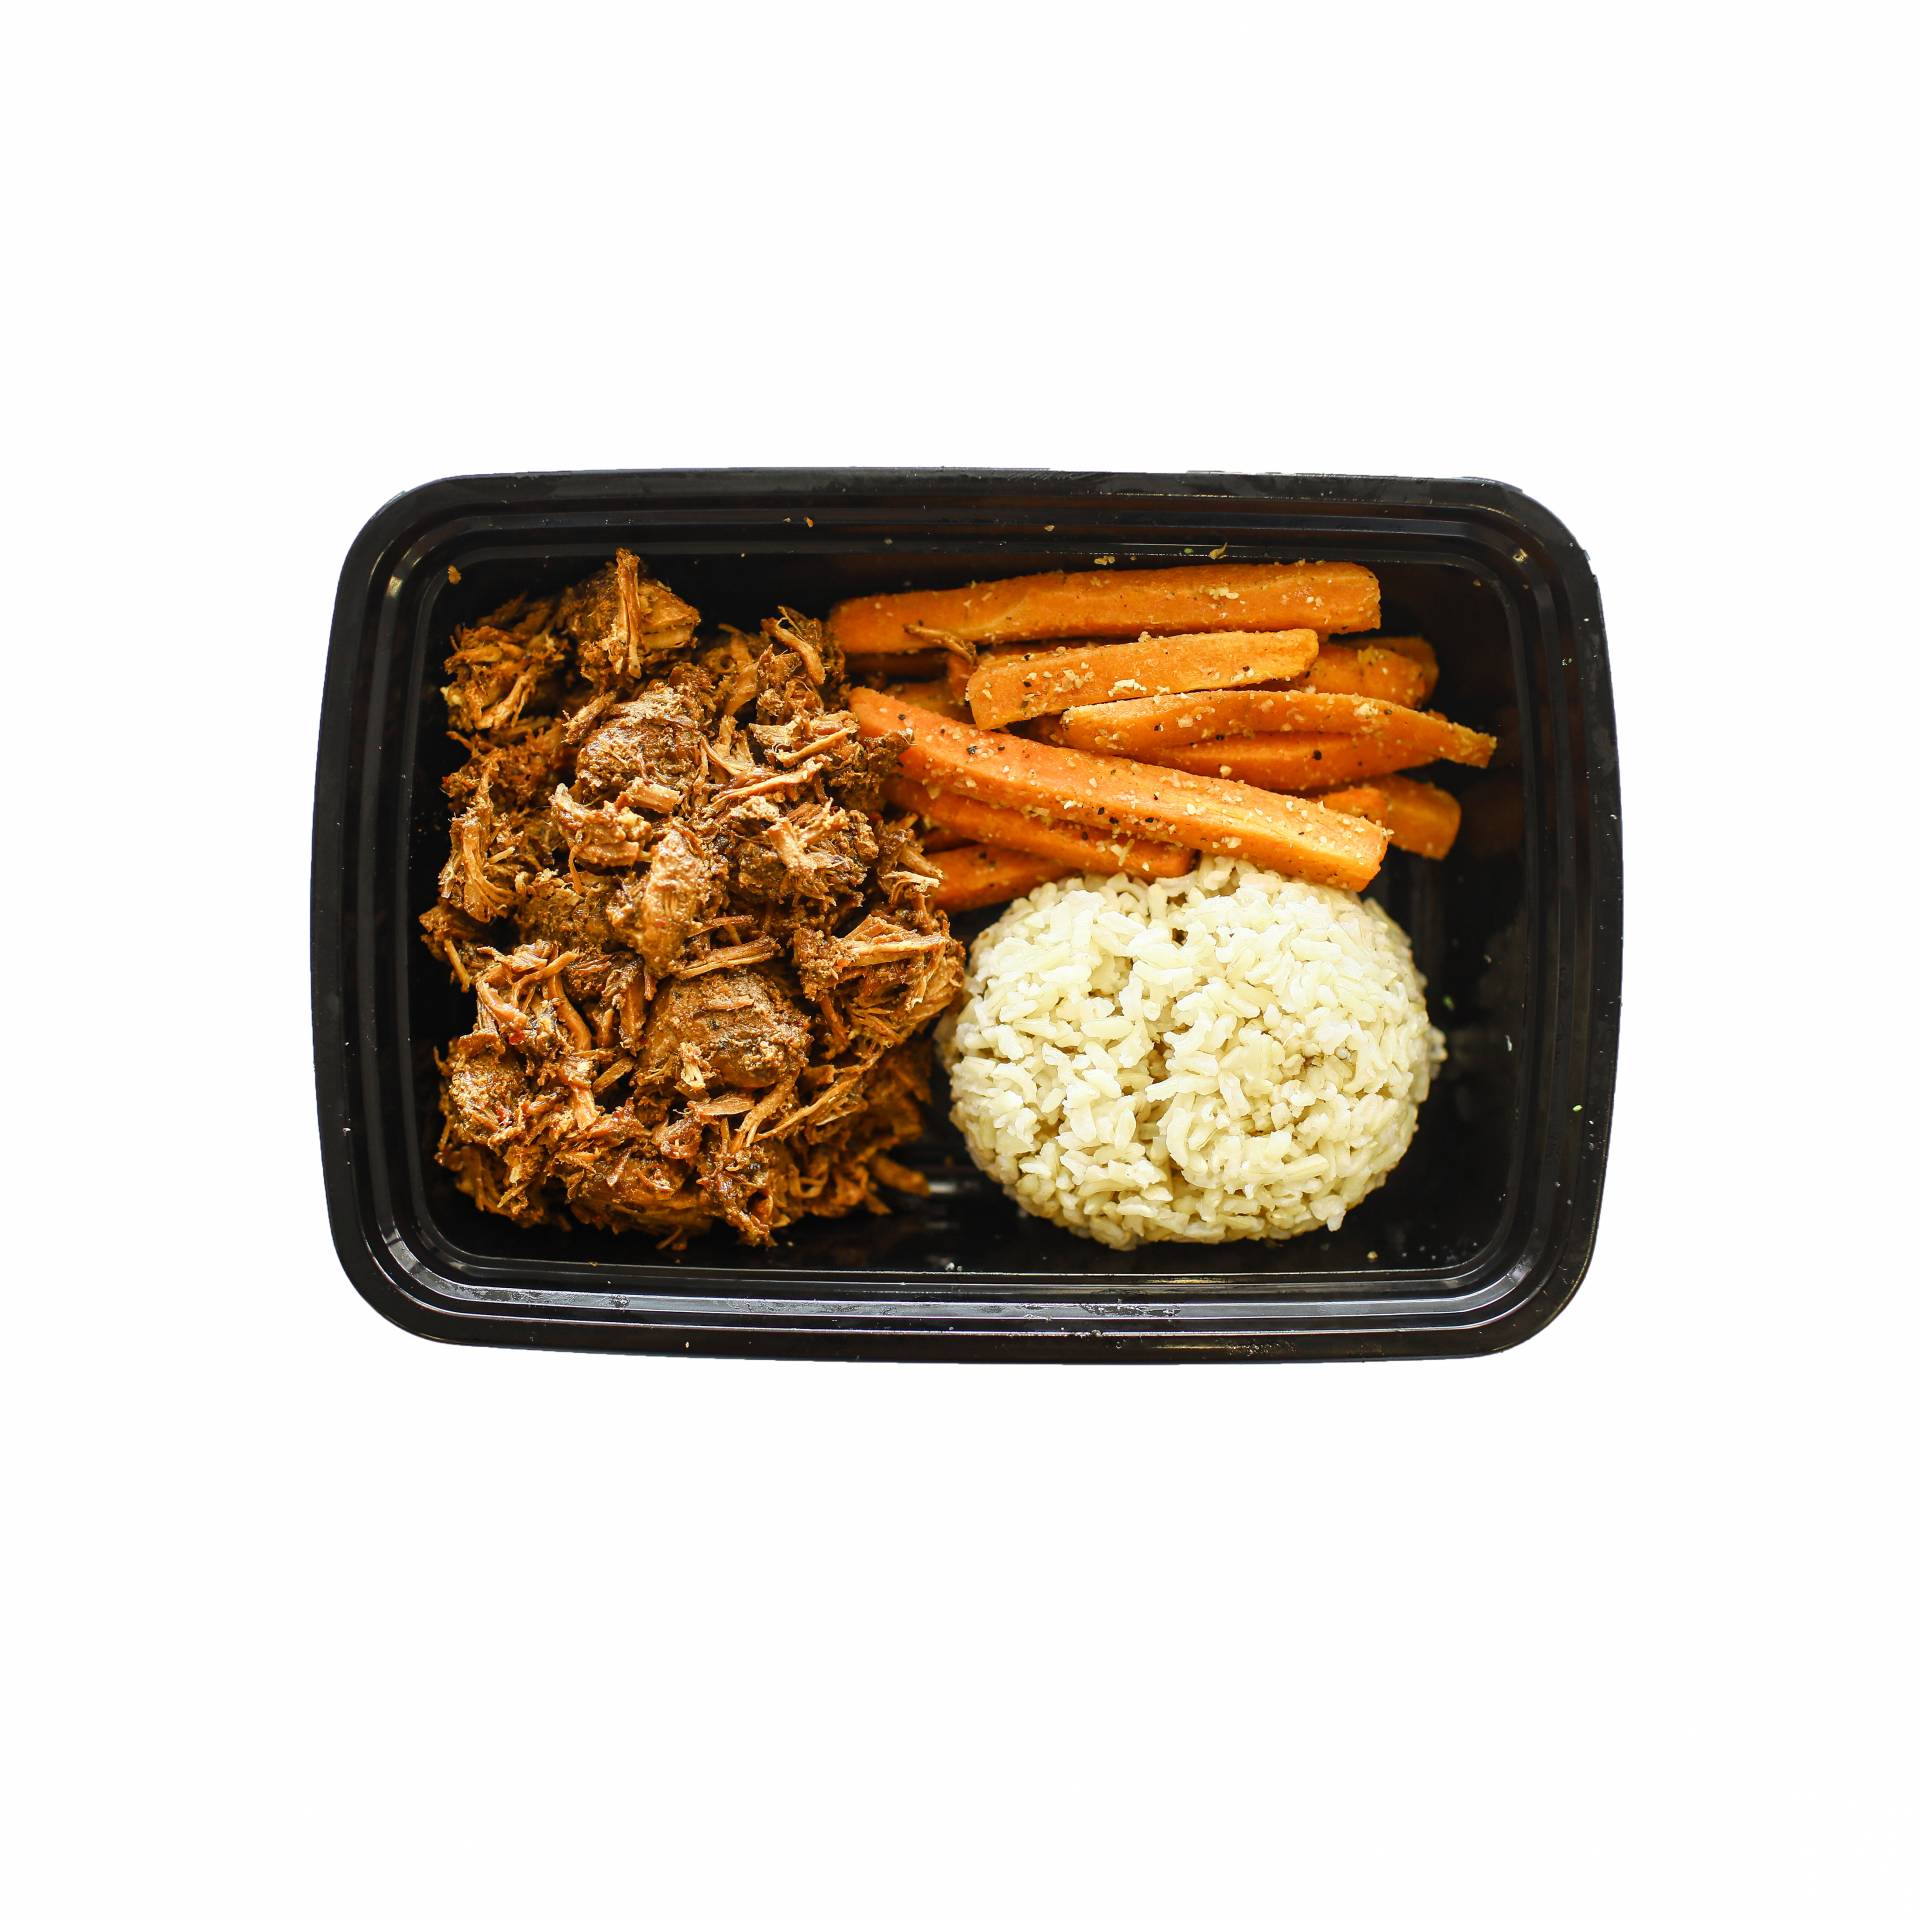 Slow-Cooked Pork with Brown Rice & Carrots